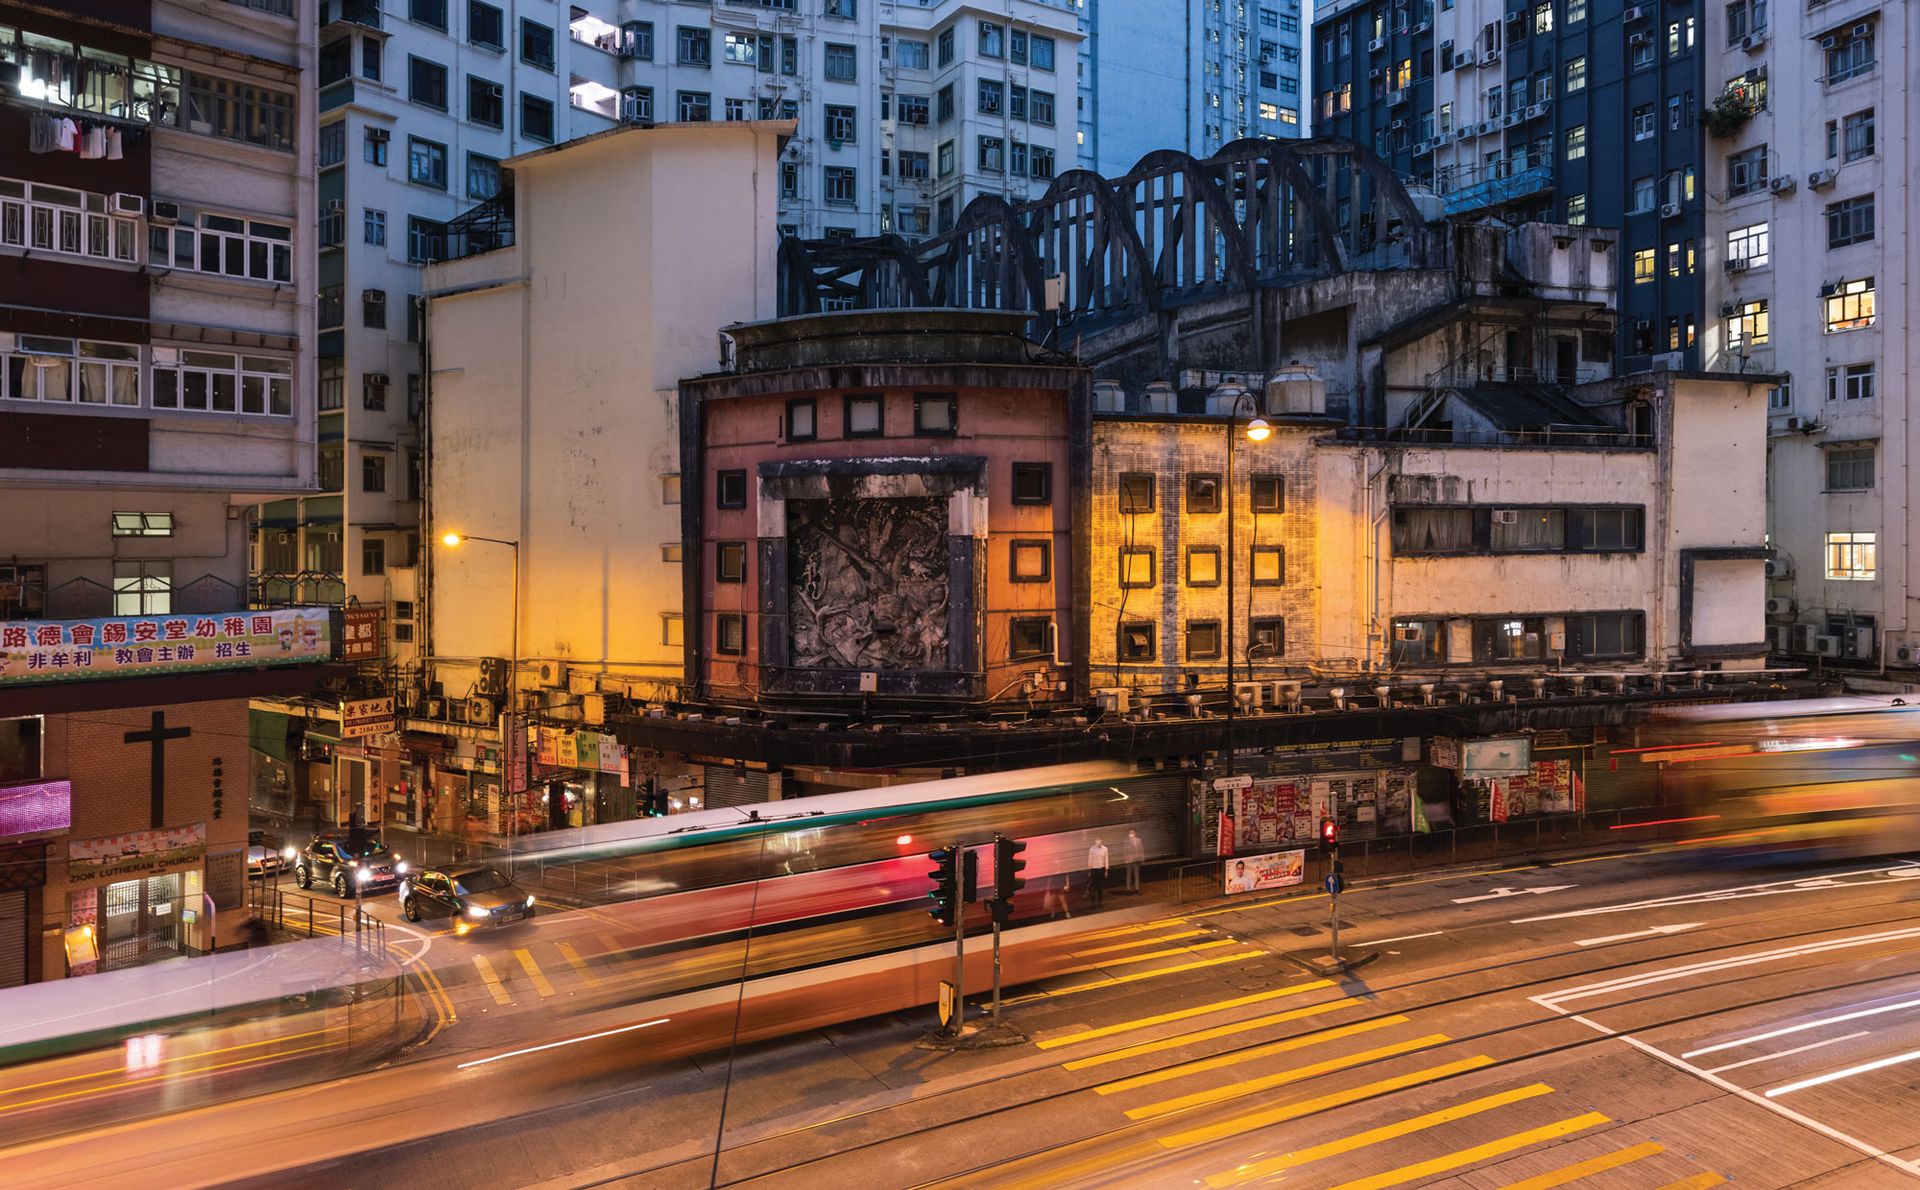 The dilapidated Hong Kong State Theatre, which operated as a cinema and live performance venue from 1952 to 1997, will be restored as an arts hub over the next five years Photo: New World Development